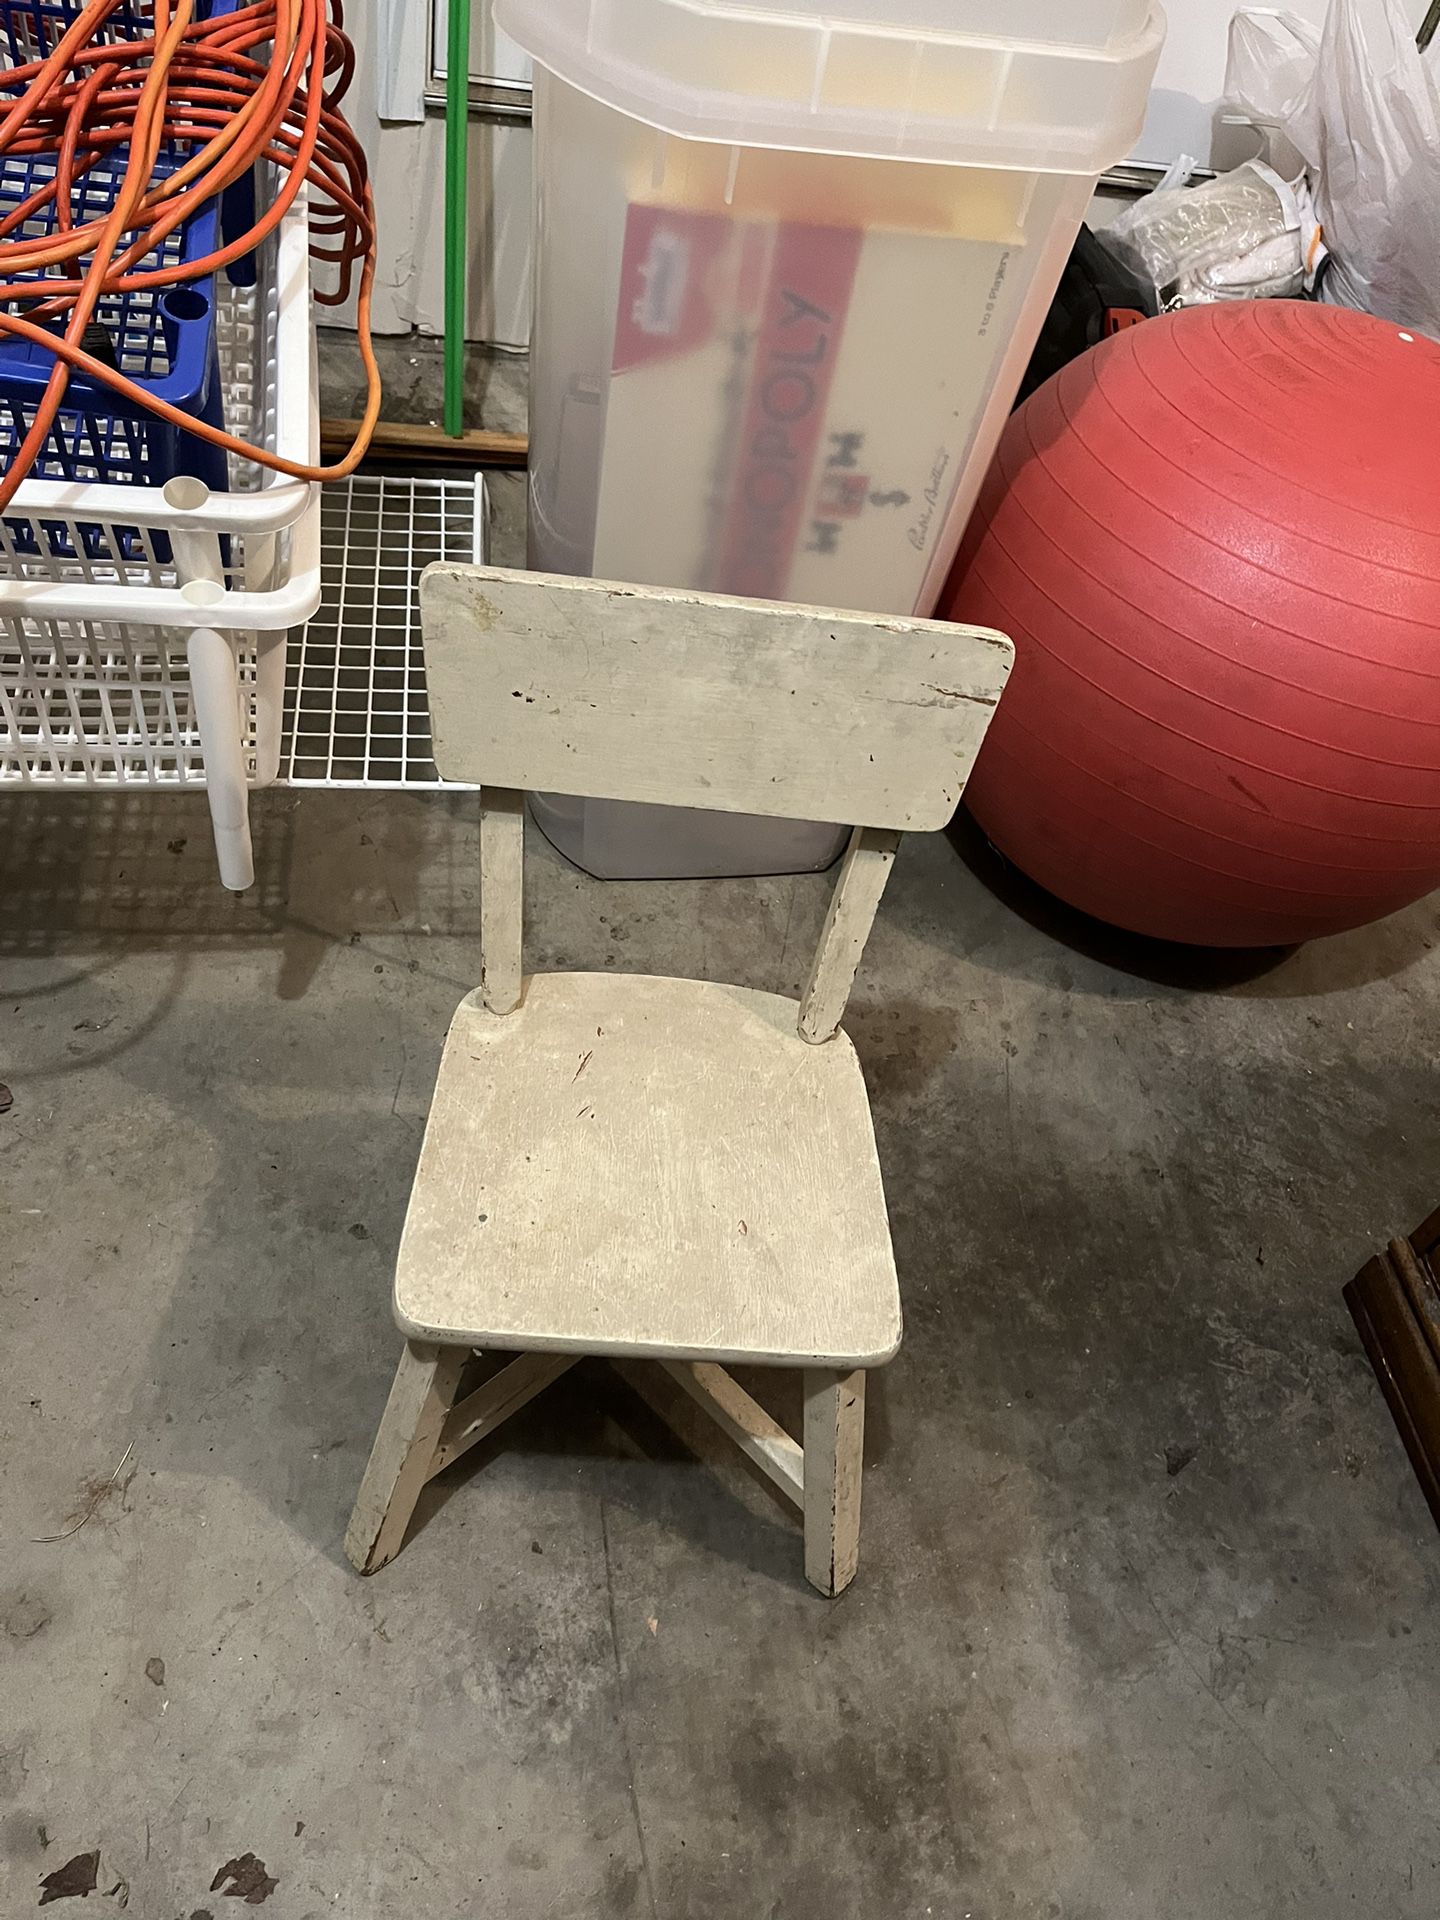 Child Size Wooden Chair